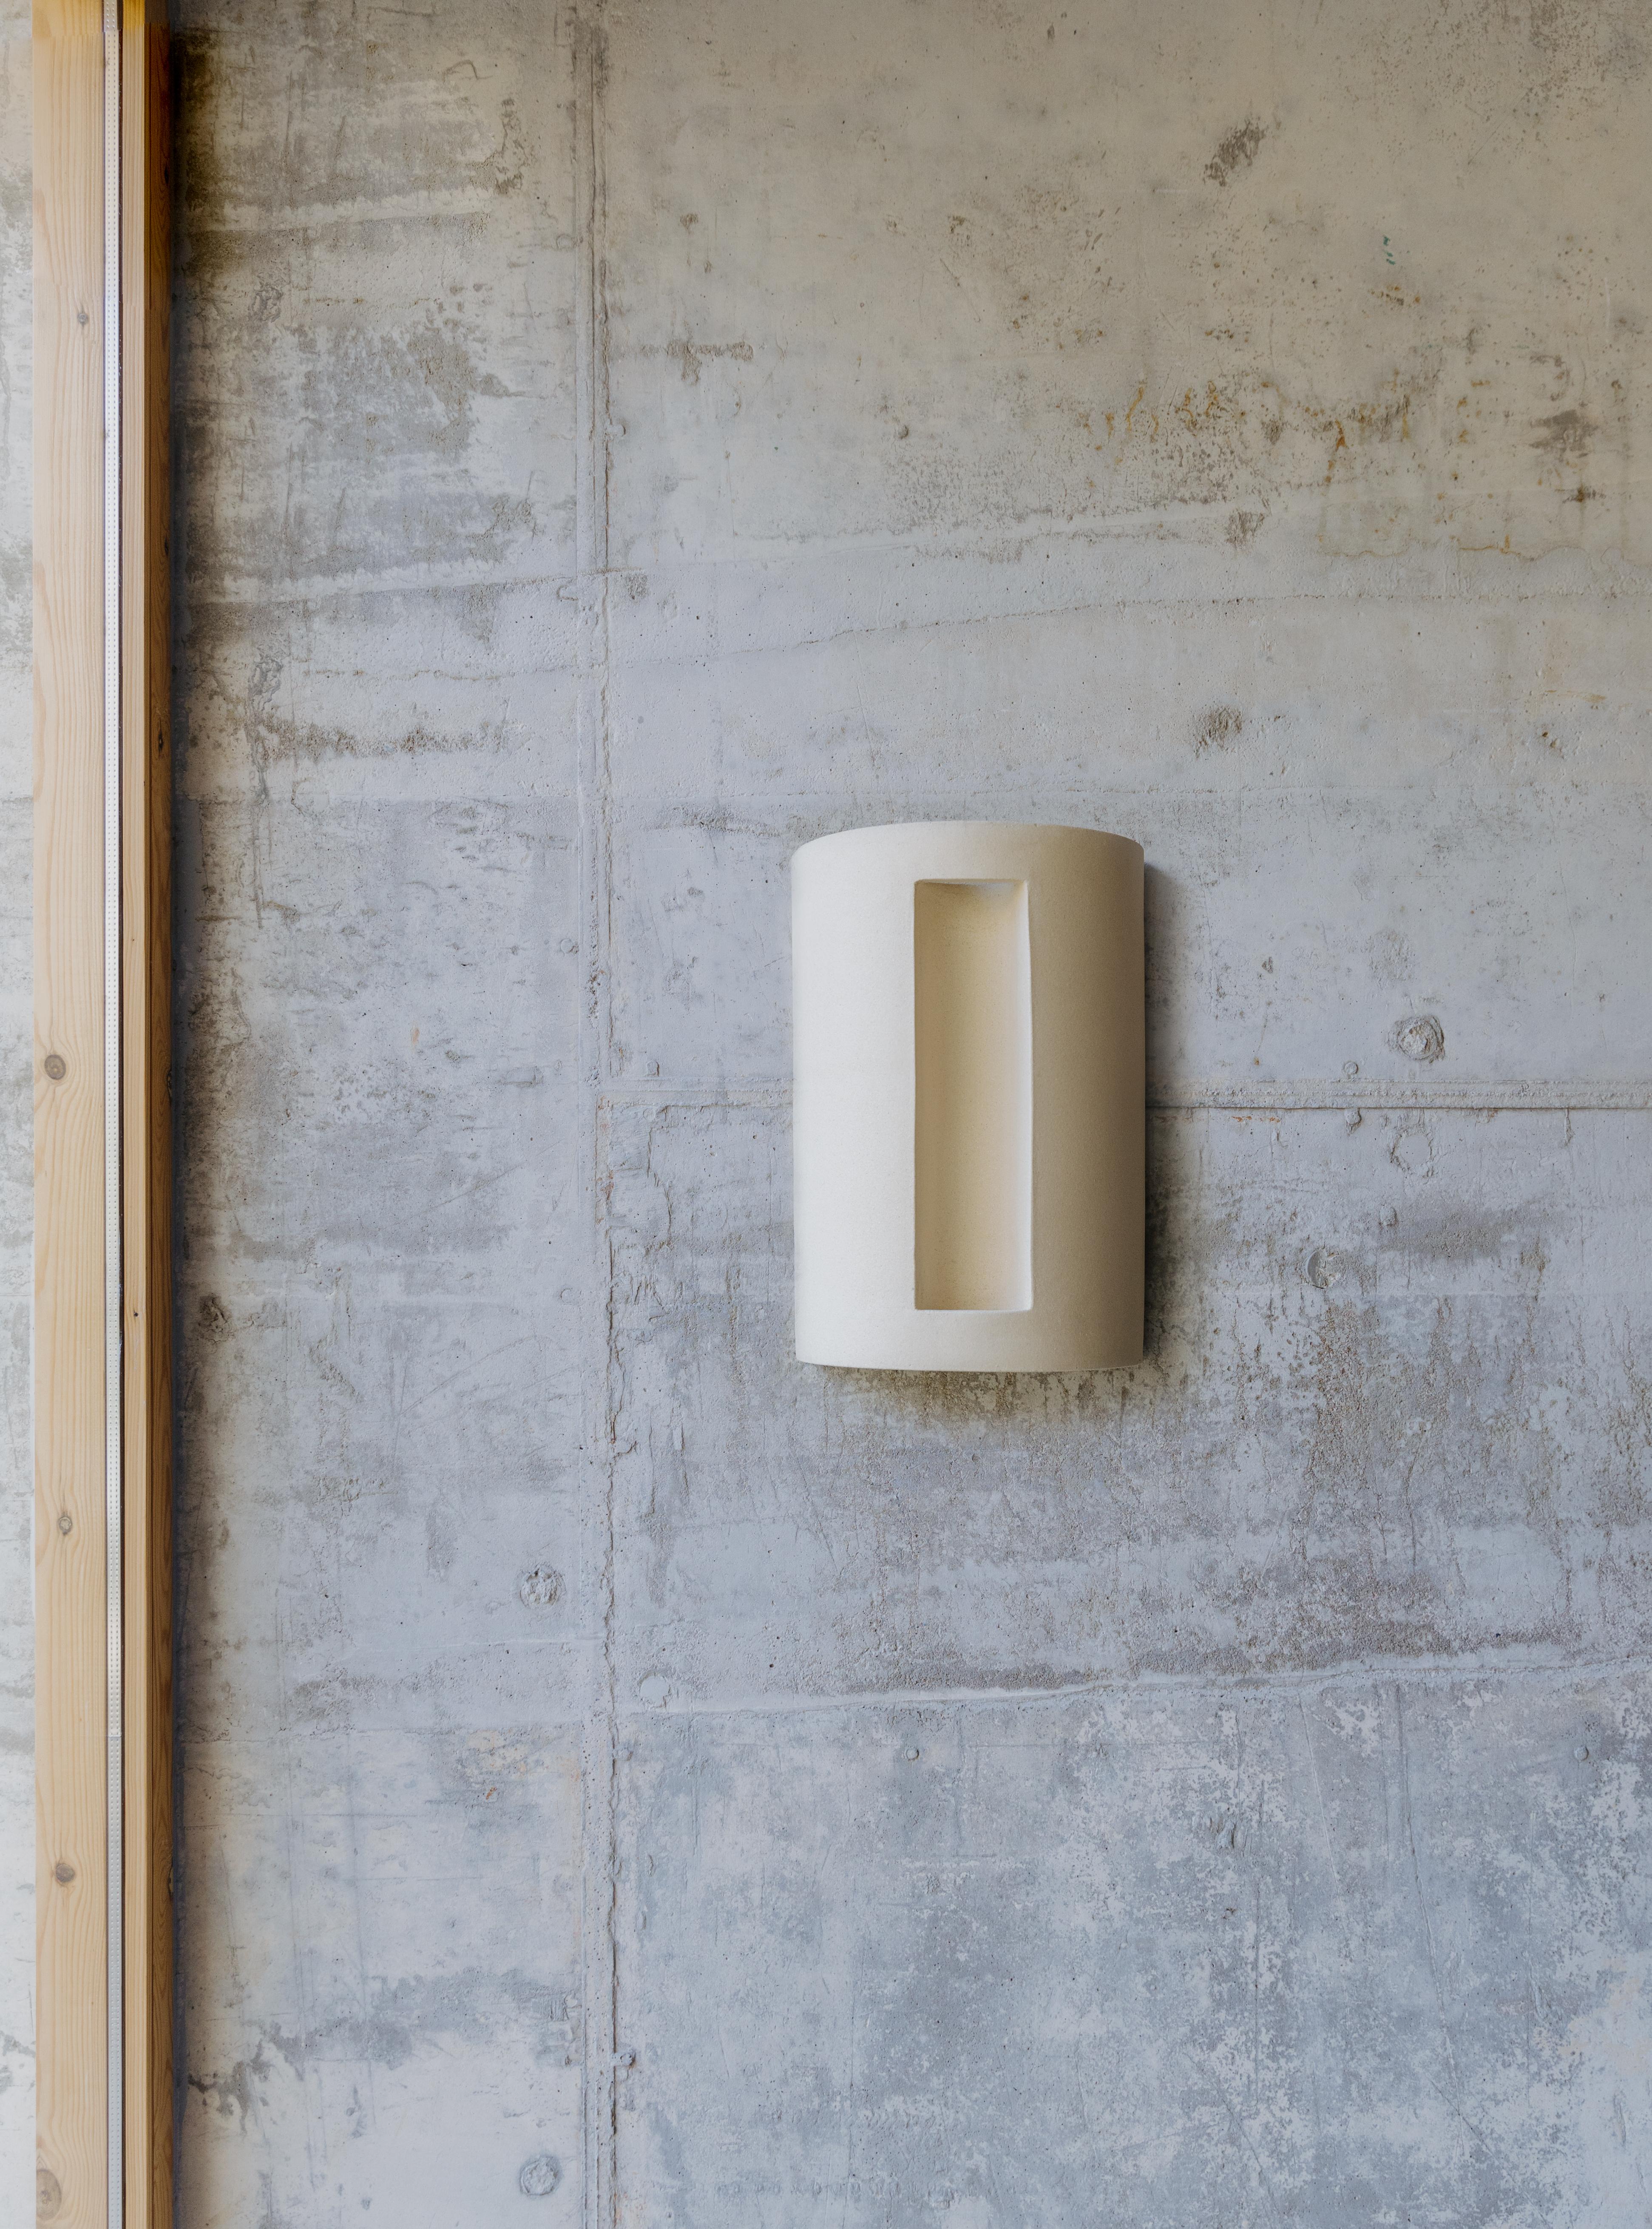 Koilos wall light by Lisa Allegra
Dimensions: W 22 x D 14 x H 32 cm
Materials: Clay

Born in 1986 in Paris, Lisa Allegra has earned in 2010 a degree in furniture design from the École Supérieure des Arts Décoratifs. She has worked for Tsé&Tsé